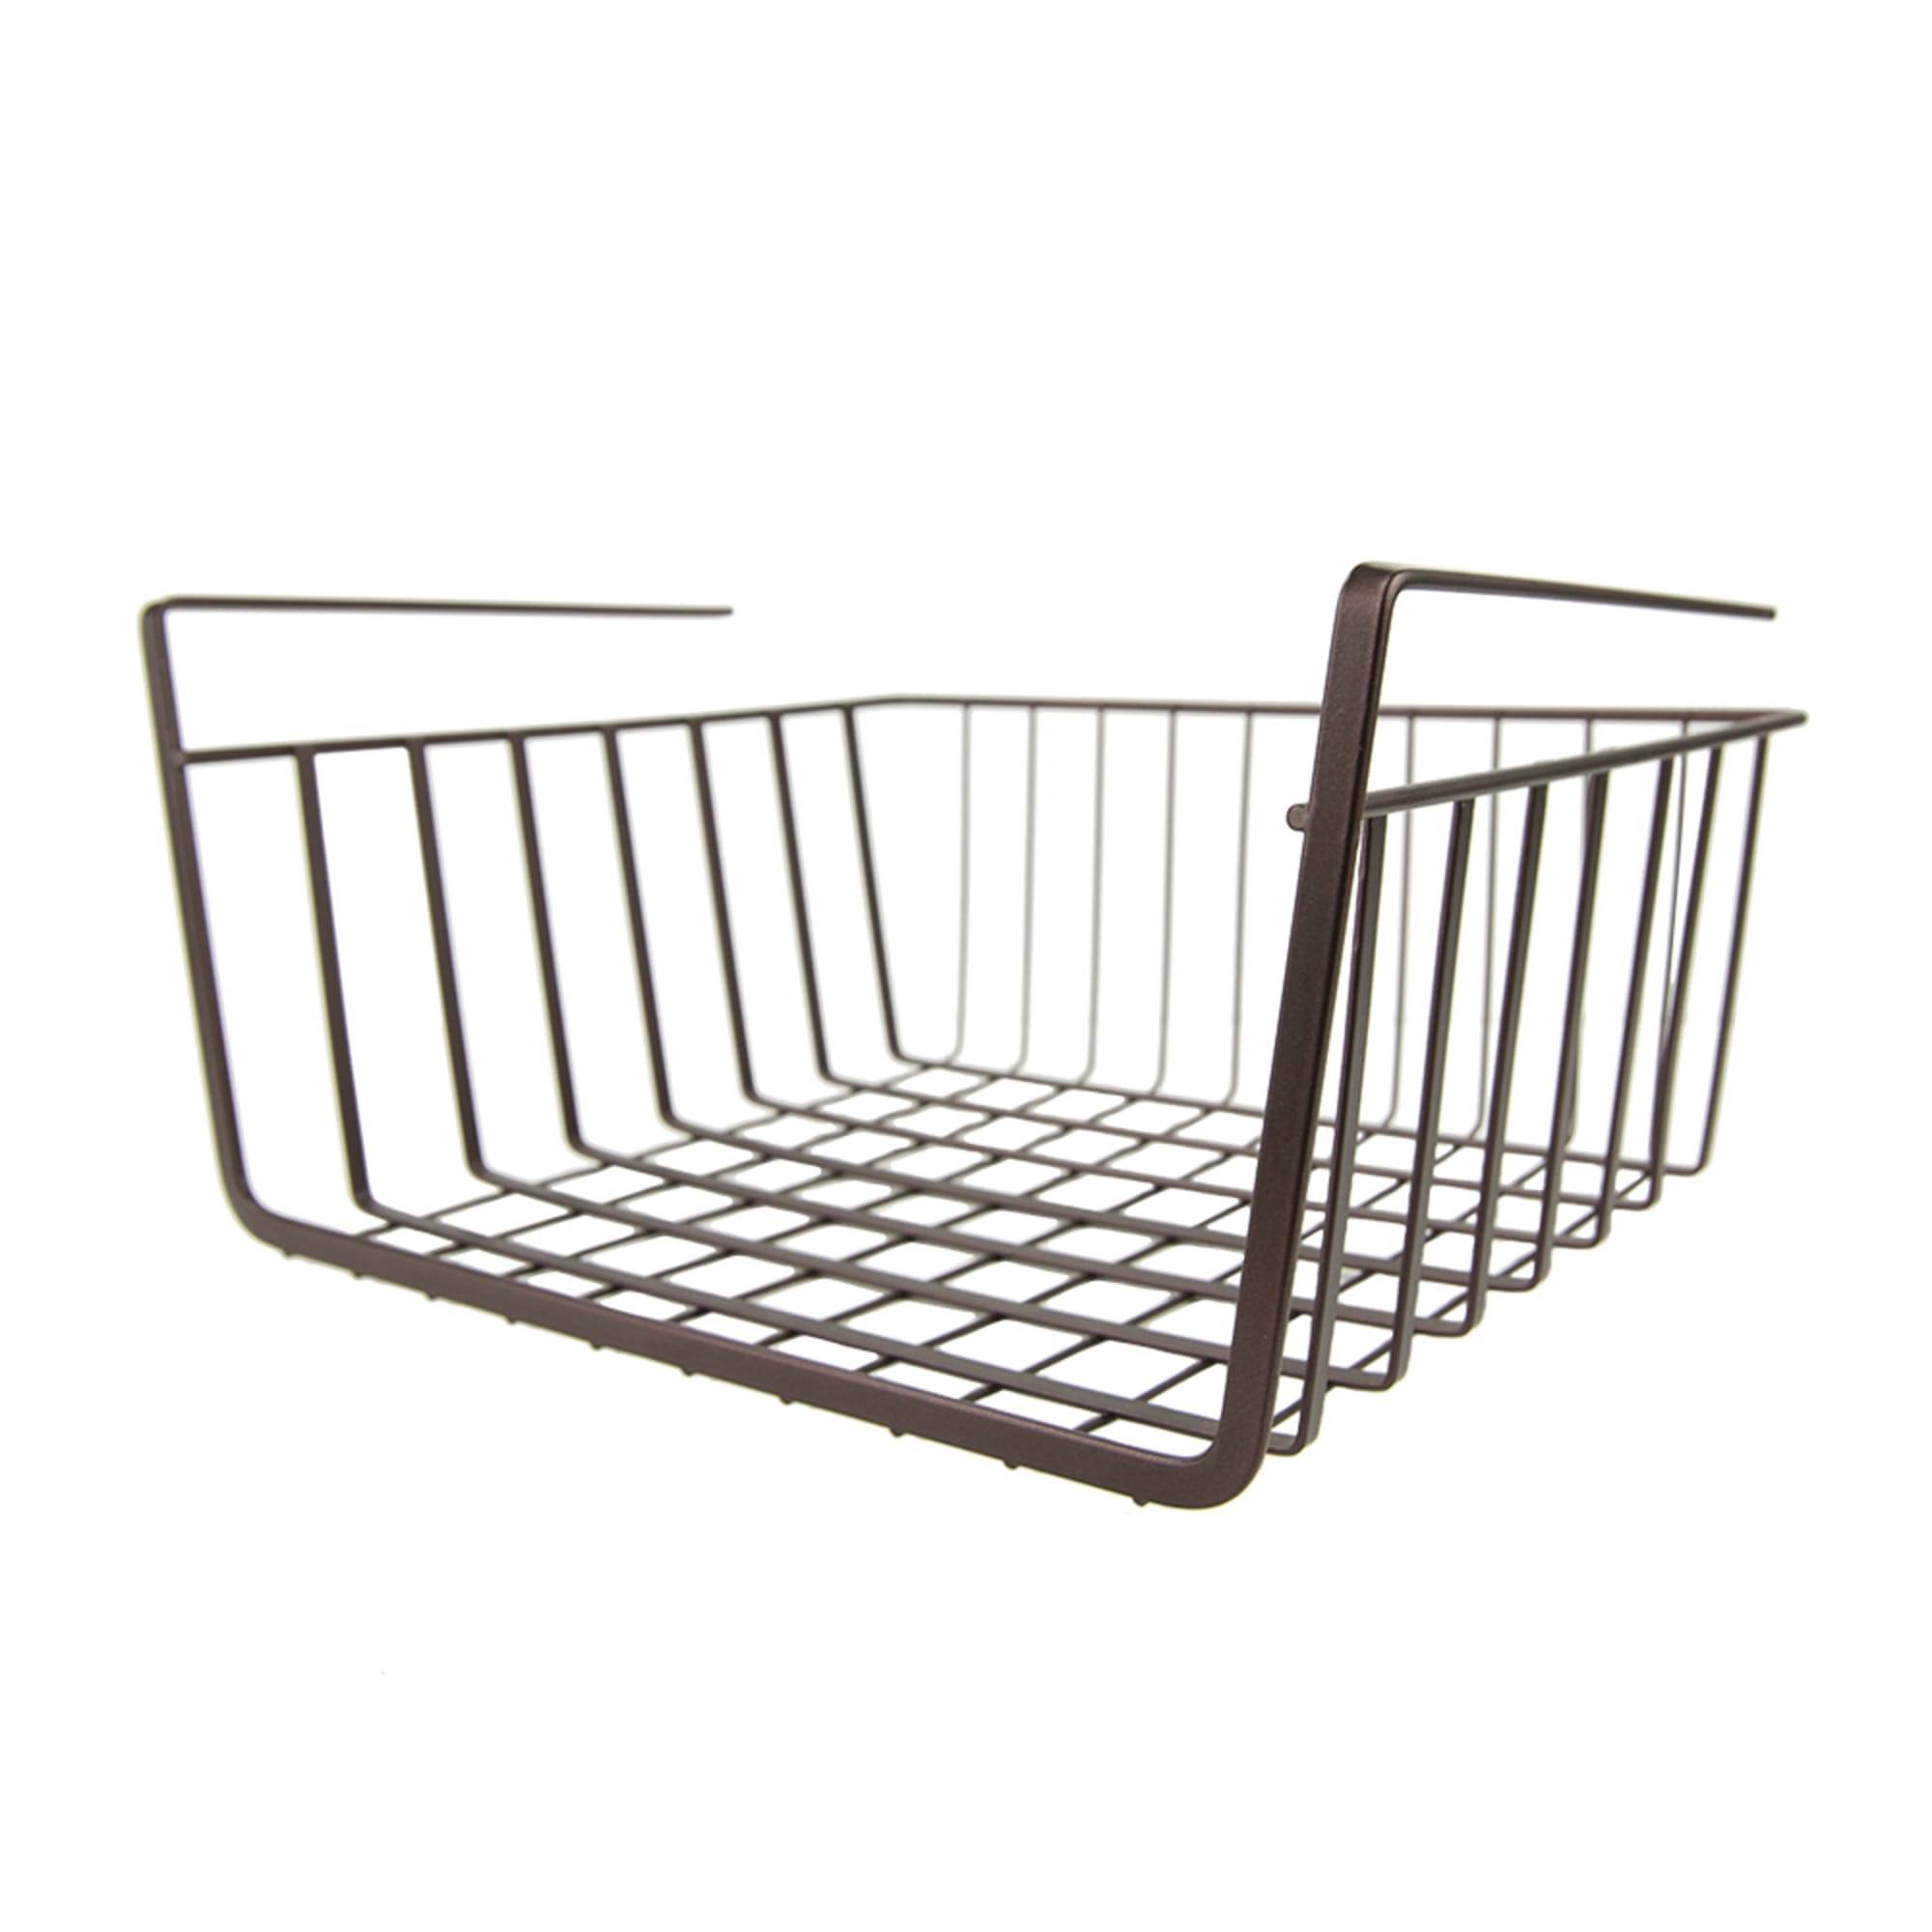 Home Basics Concord Bronze Collection 12.5" Under the Shelf Basket $4.00 EACH, CASE PACK OF 6